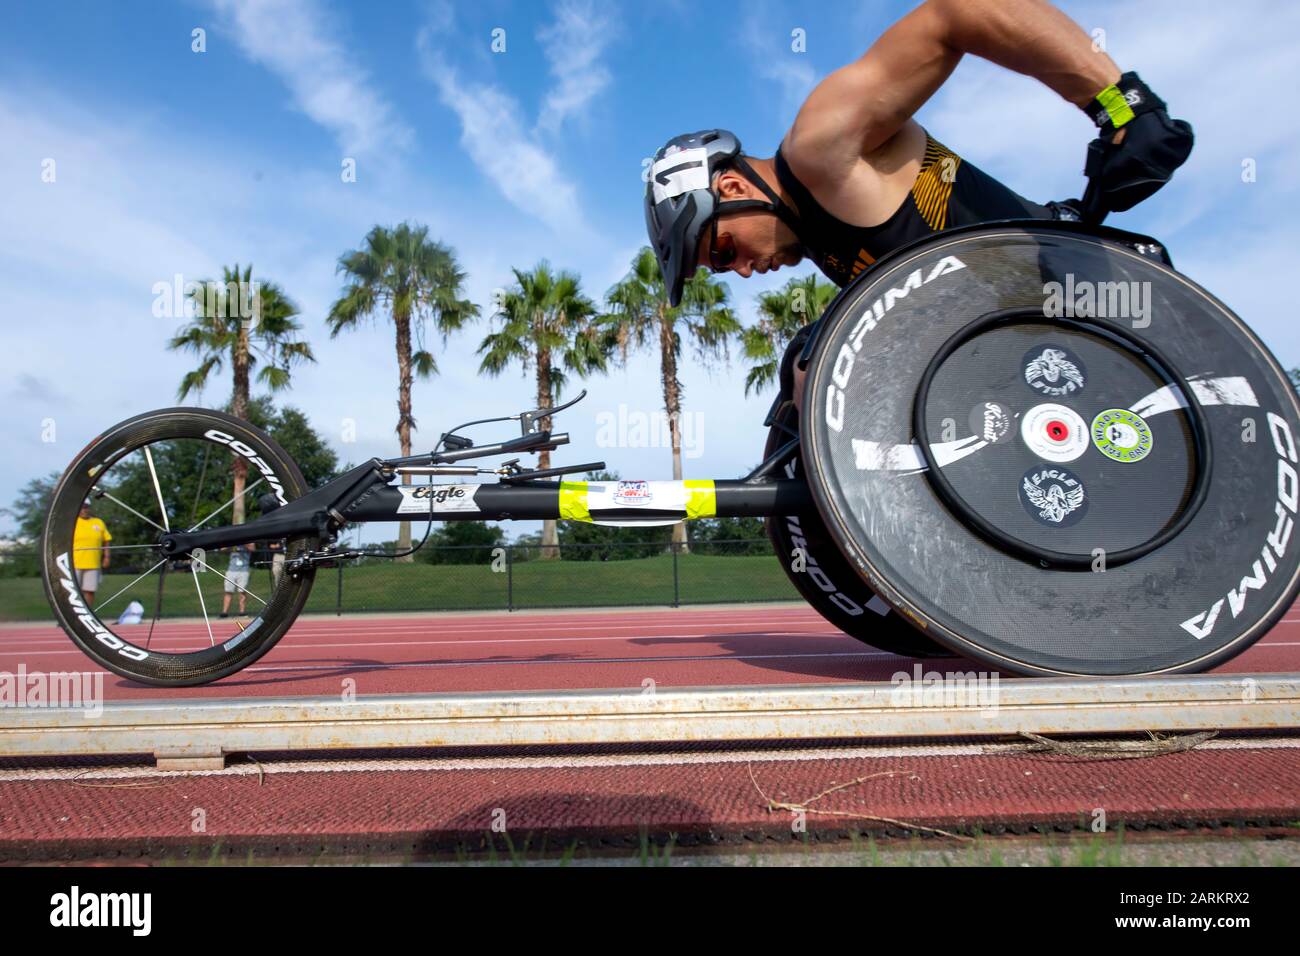 Army Sgt. Jonathan Weasner races a wheelchair during the 2019 DoD Warrior Games in Tampa, Fla. June 22, 2019. (DoD photo by EJ Hersom) Stock Photo